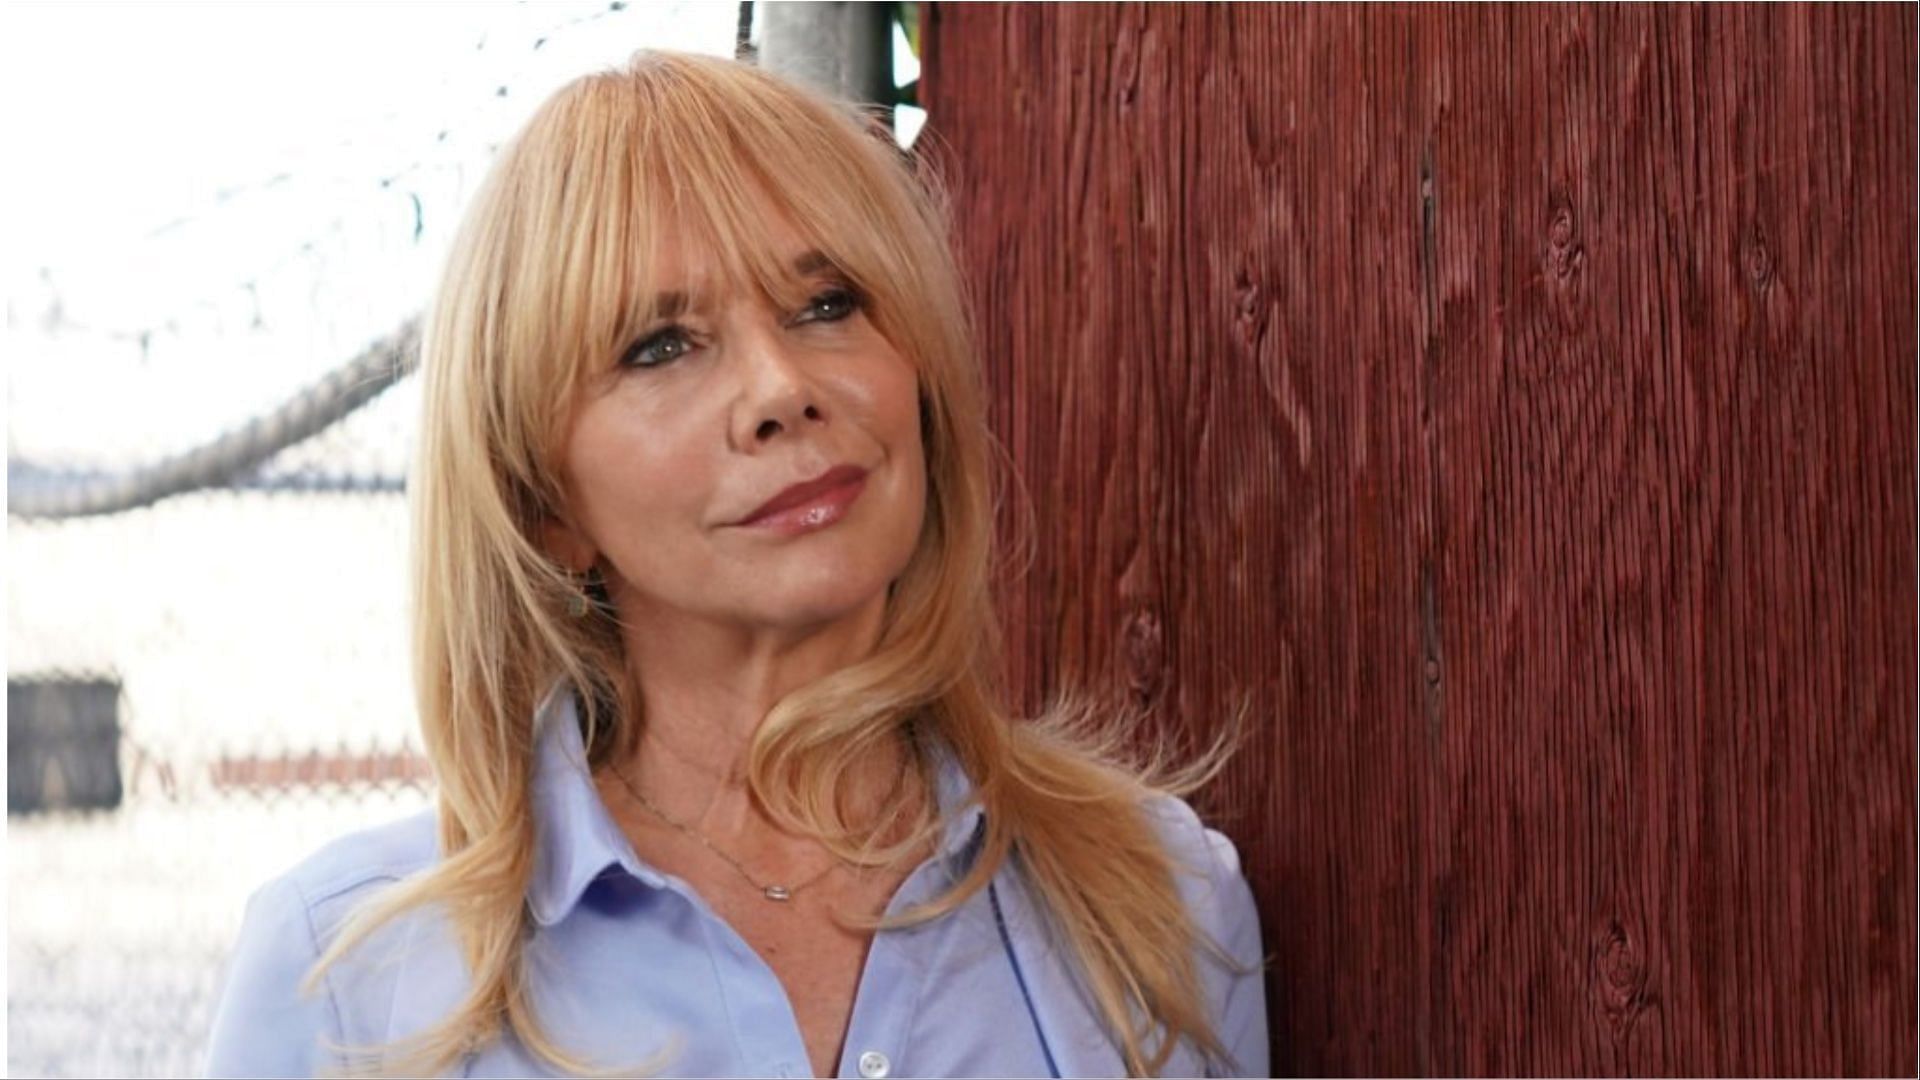 Rosanna Arquette recently met with an accident (Image via Michael Moriatis/Getty Images)